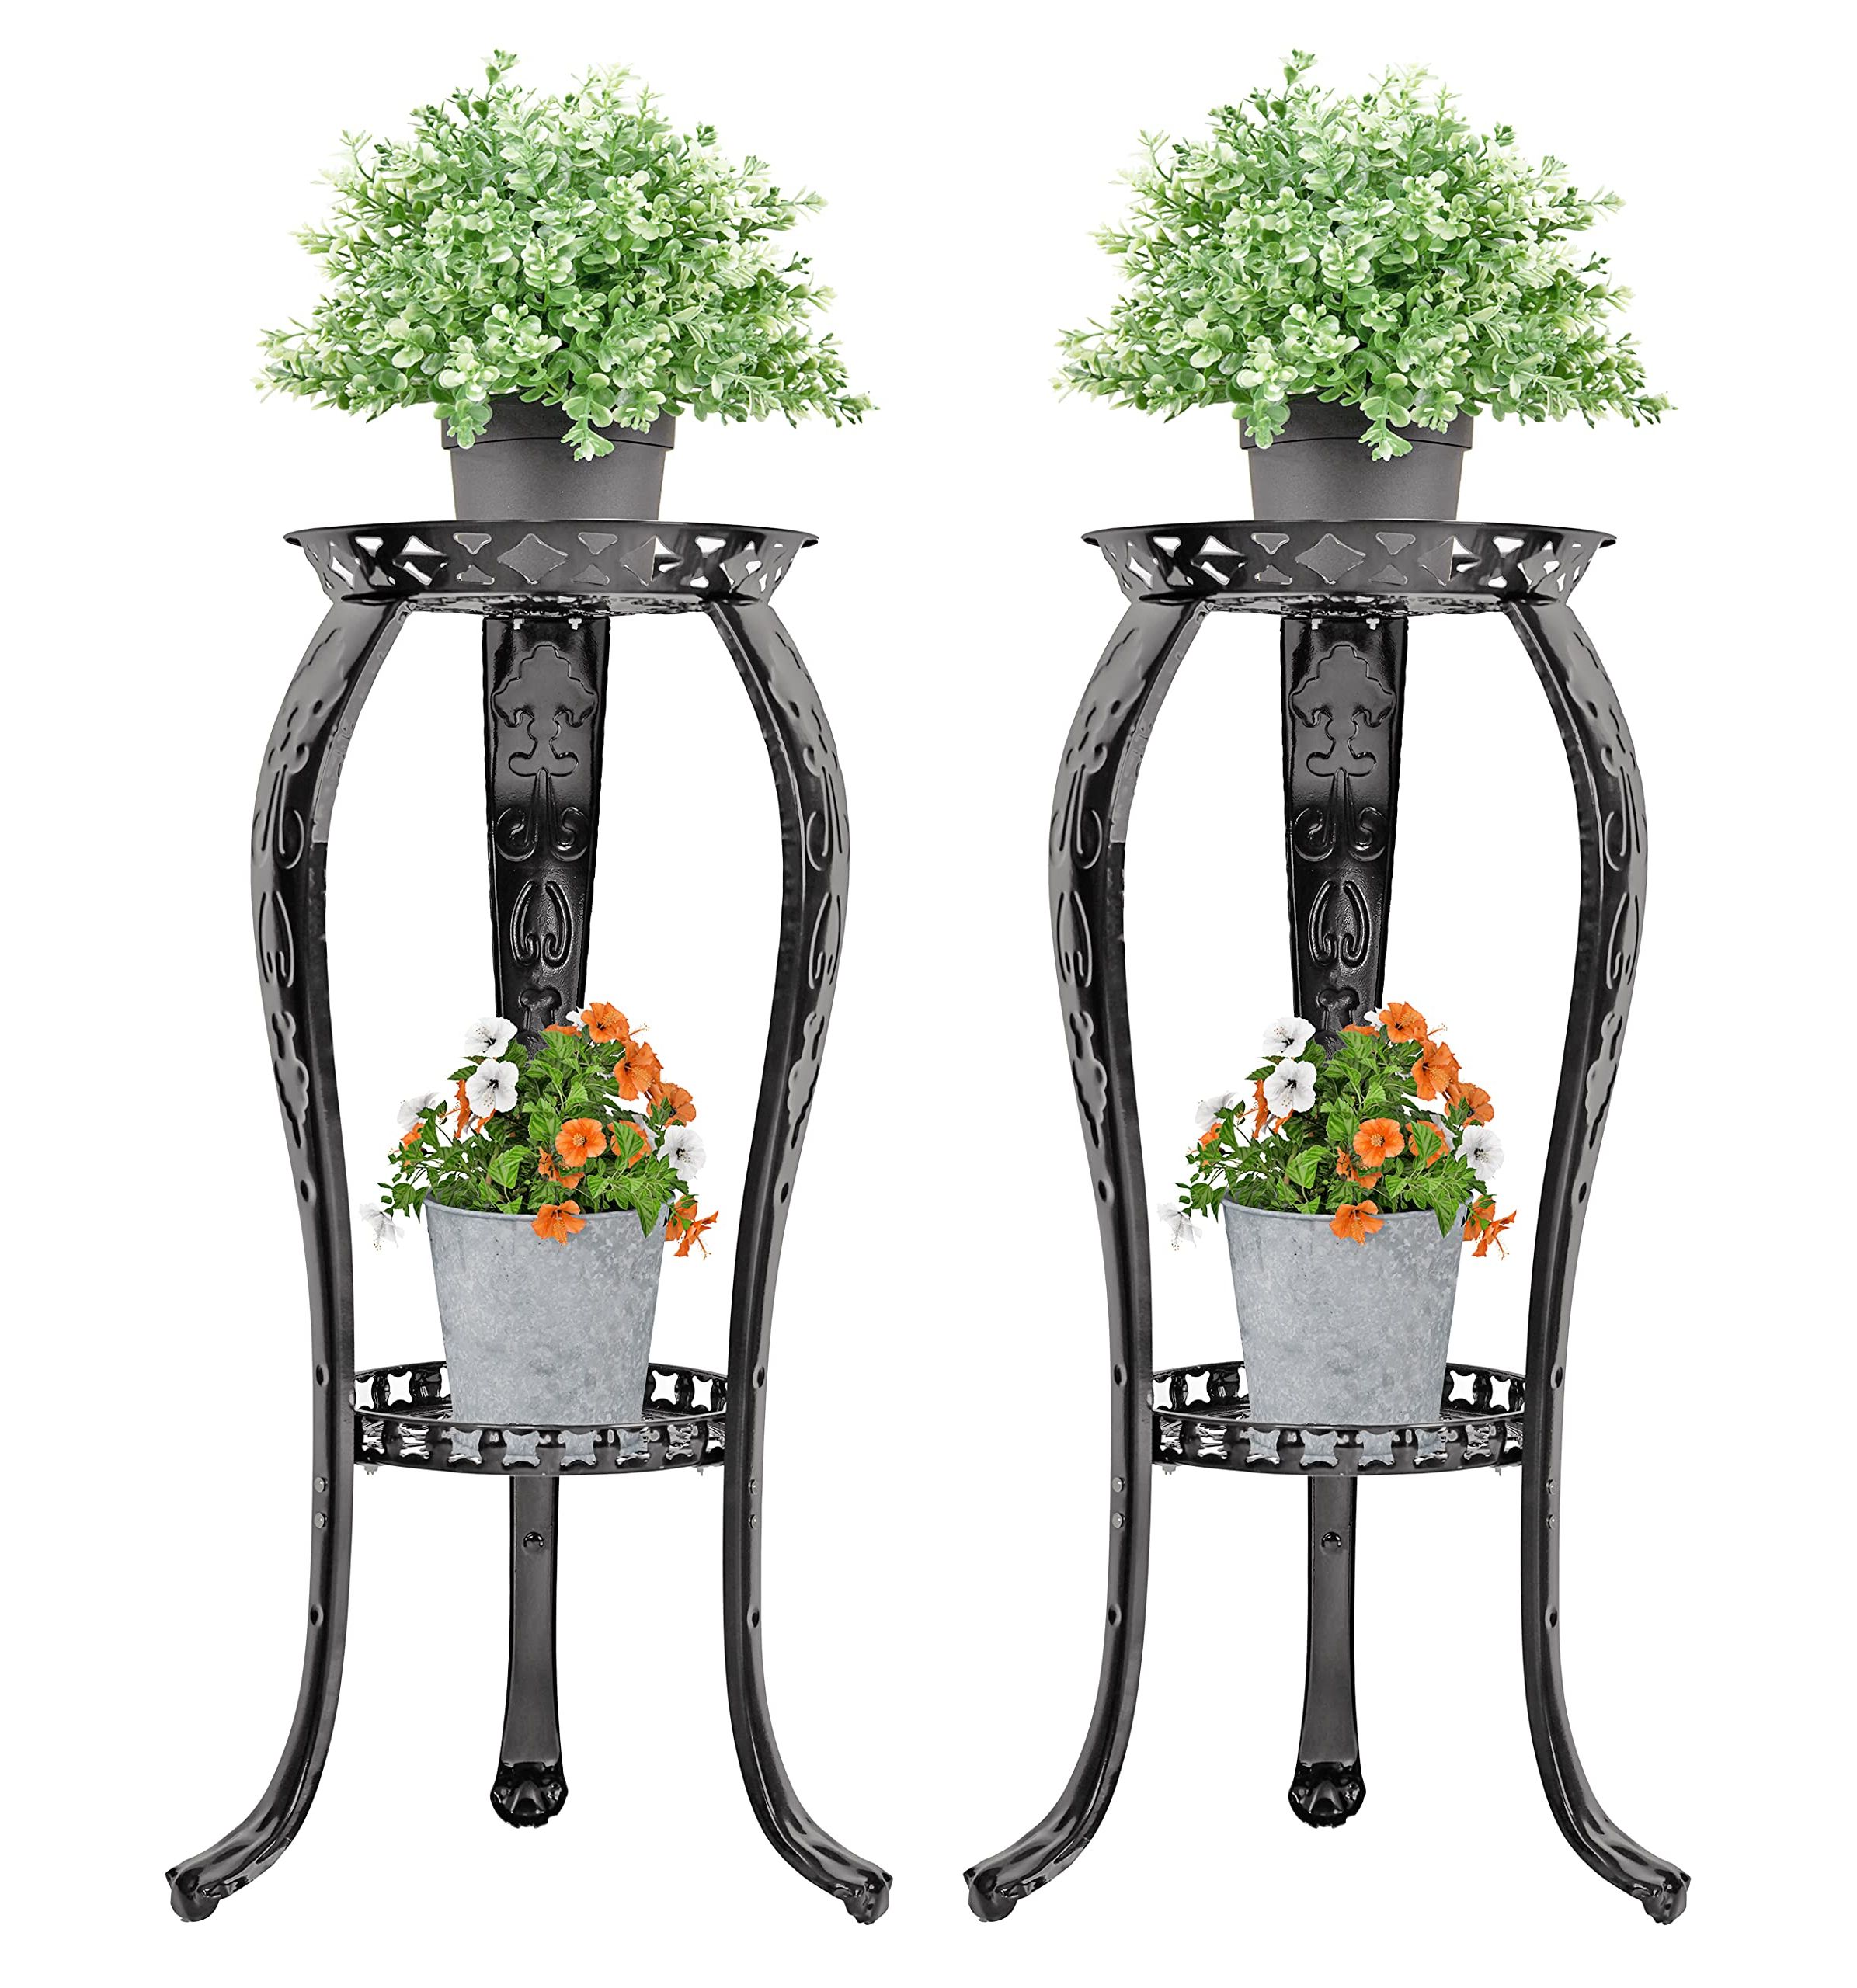 Most Recently Released 32 Inch Plant Stands For Amazon : Yeavs 2 Pack Metal Plant Stand 2 Tier, 32 Inch Rustproof  Decorative Flower Pot Shelf Rack For Indoor Outdoor Home Garden Office,  Planter Display Holder Stand (2, Black) : Patio, Lawn & Garden (View 3 of 10)